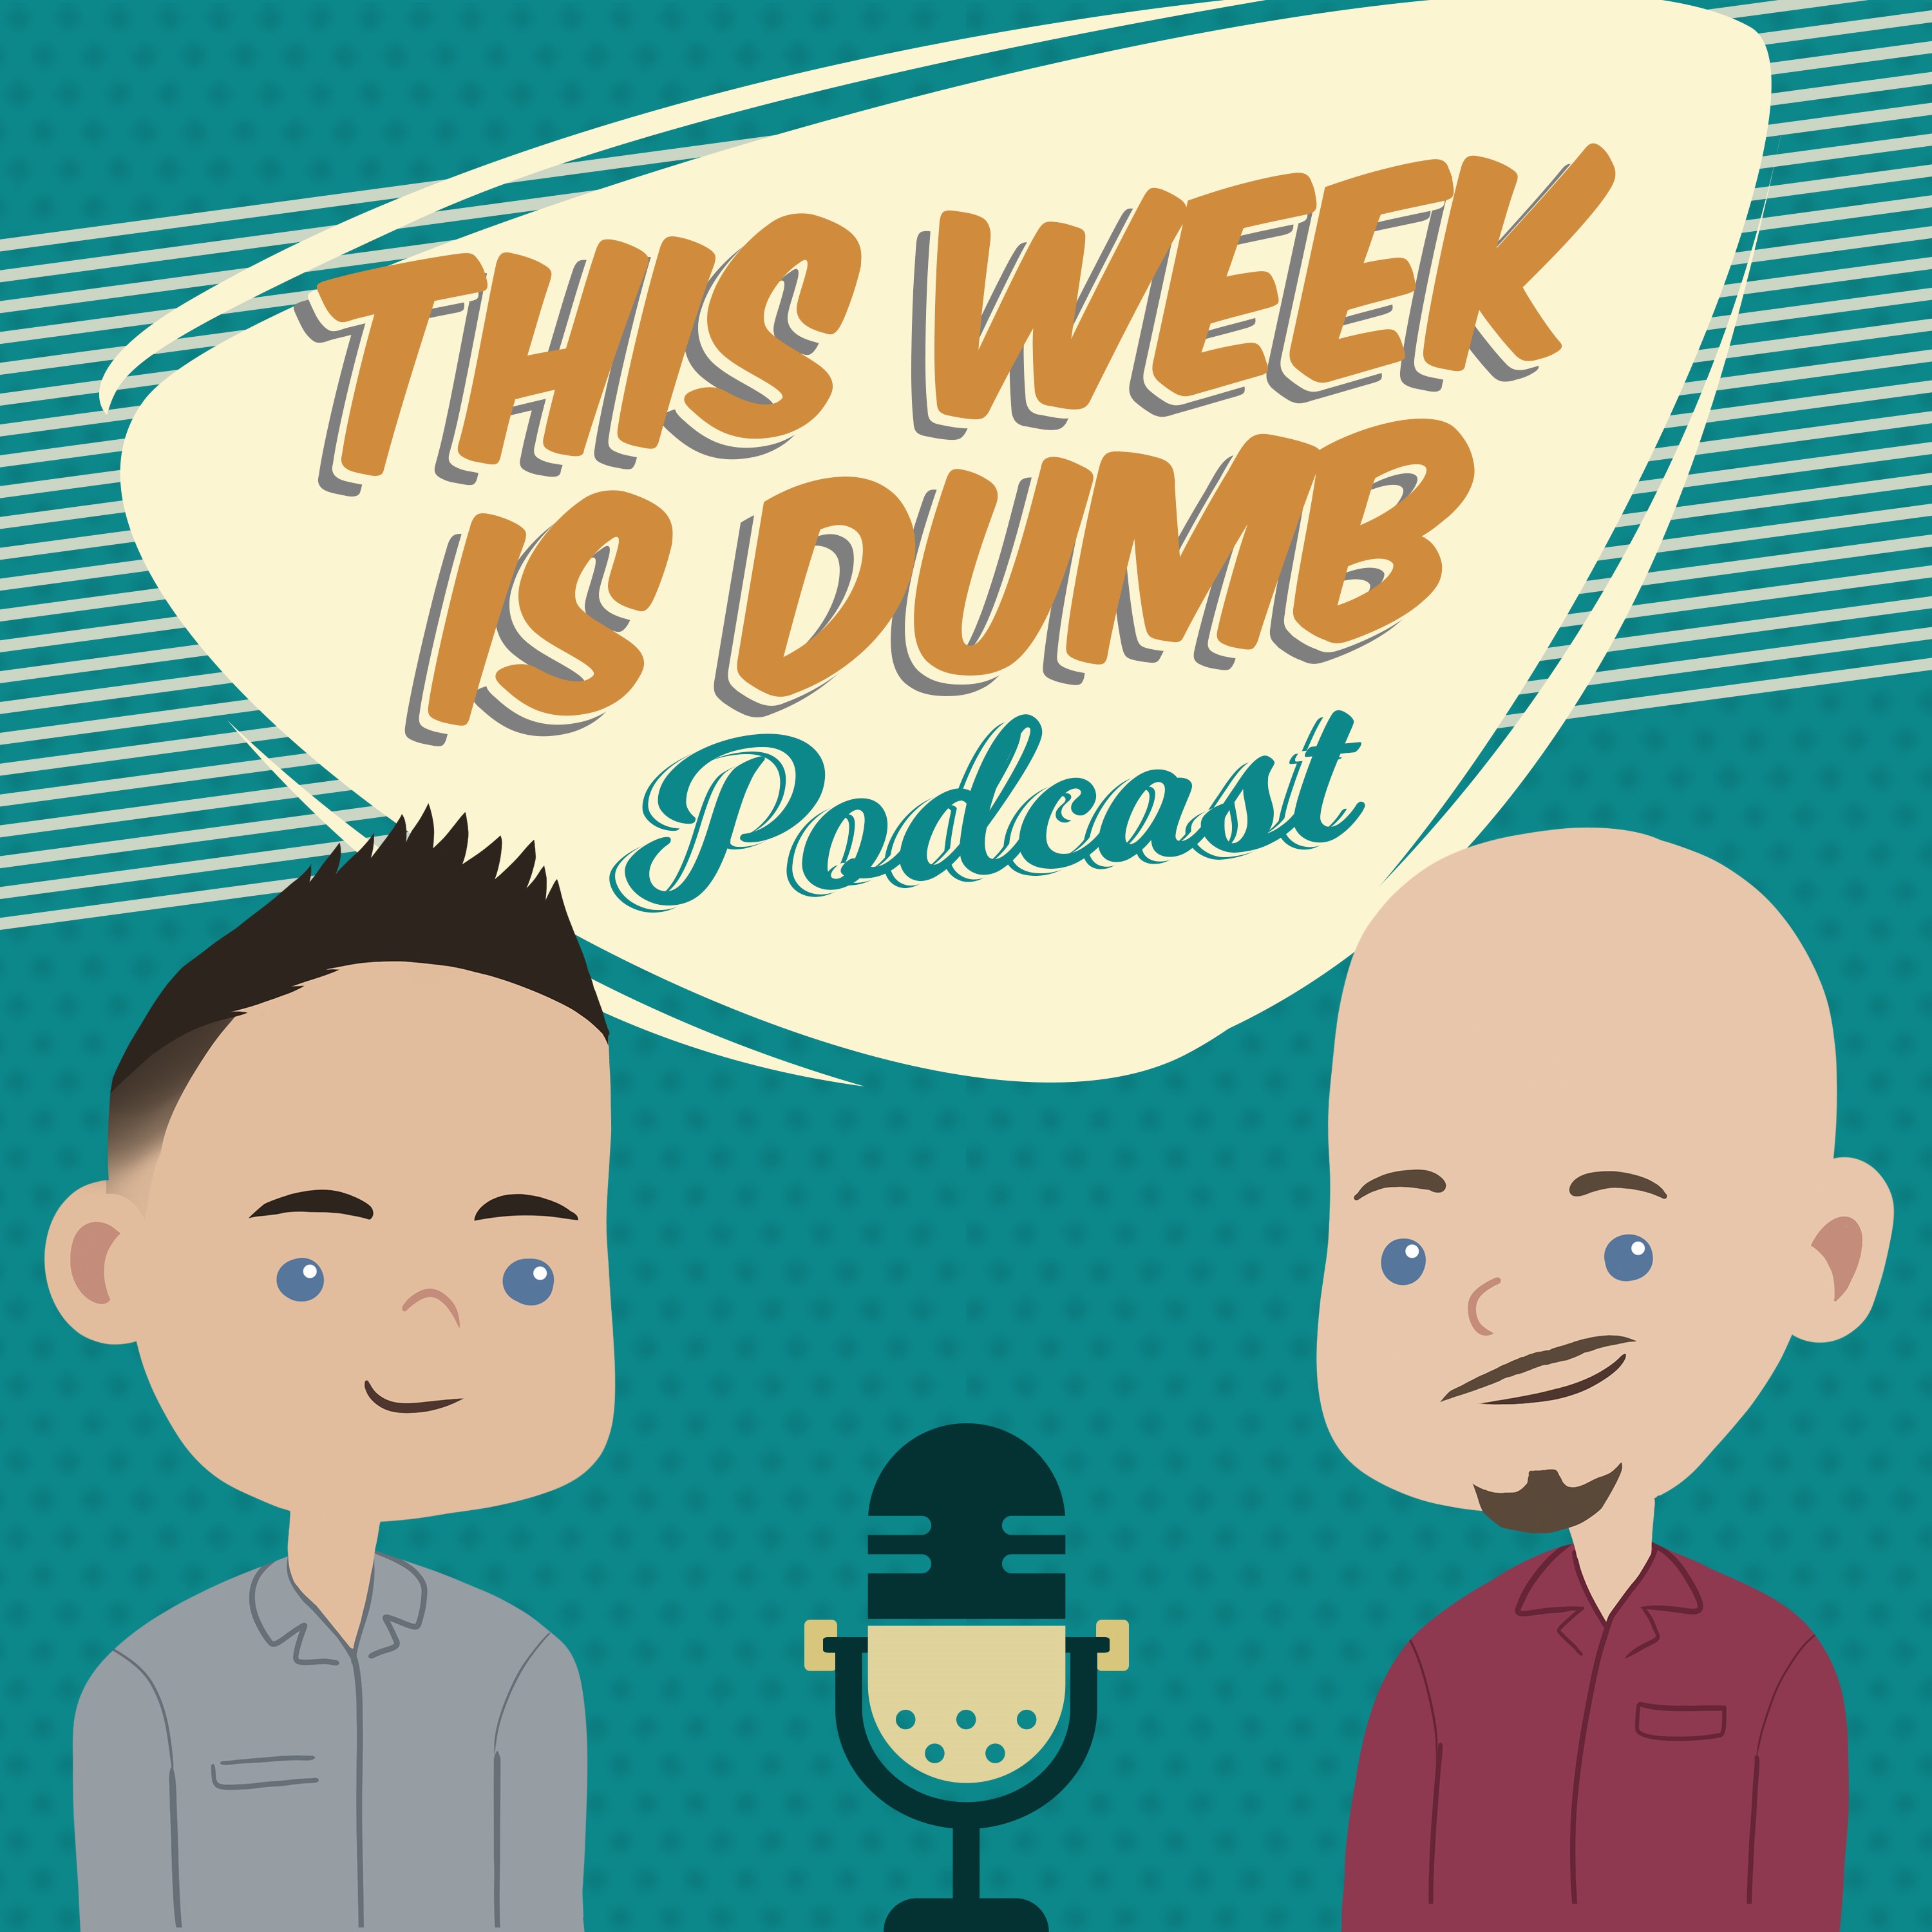 Artwork for podcast This Week is Dumb